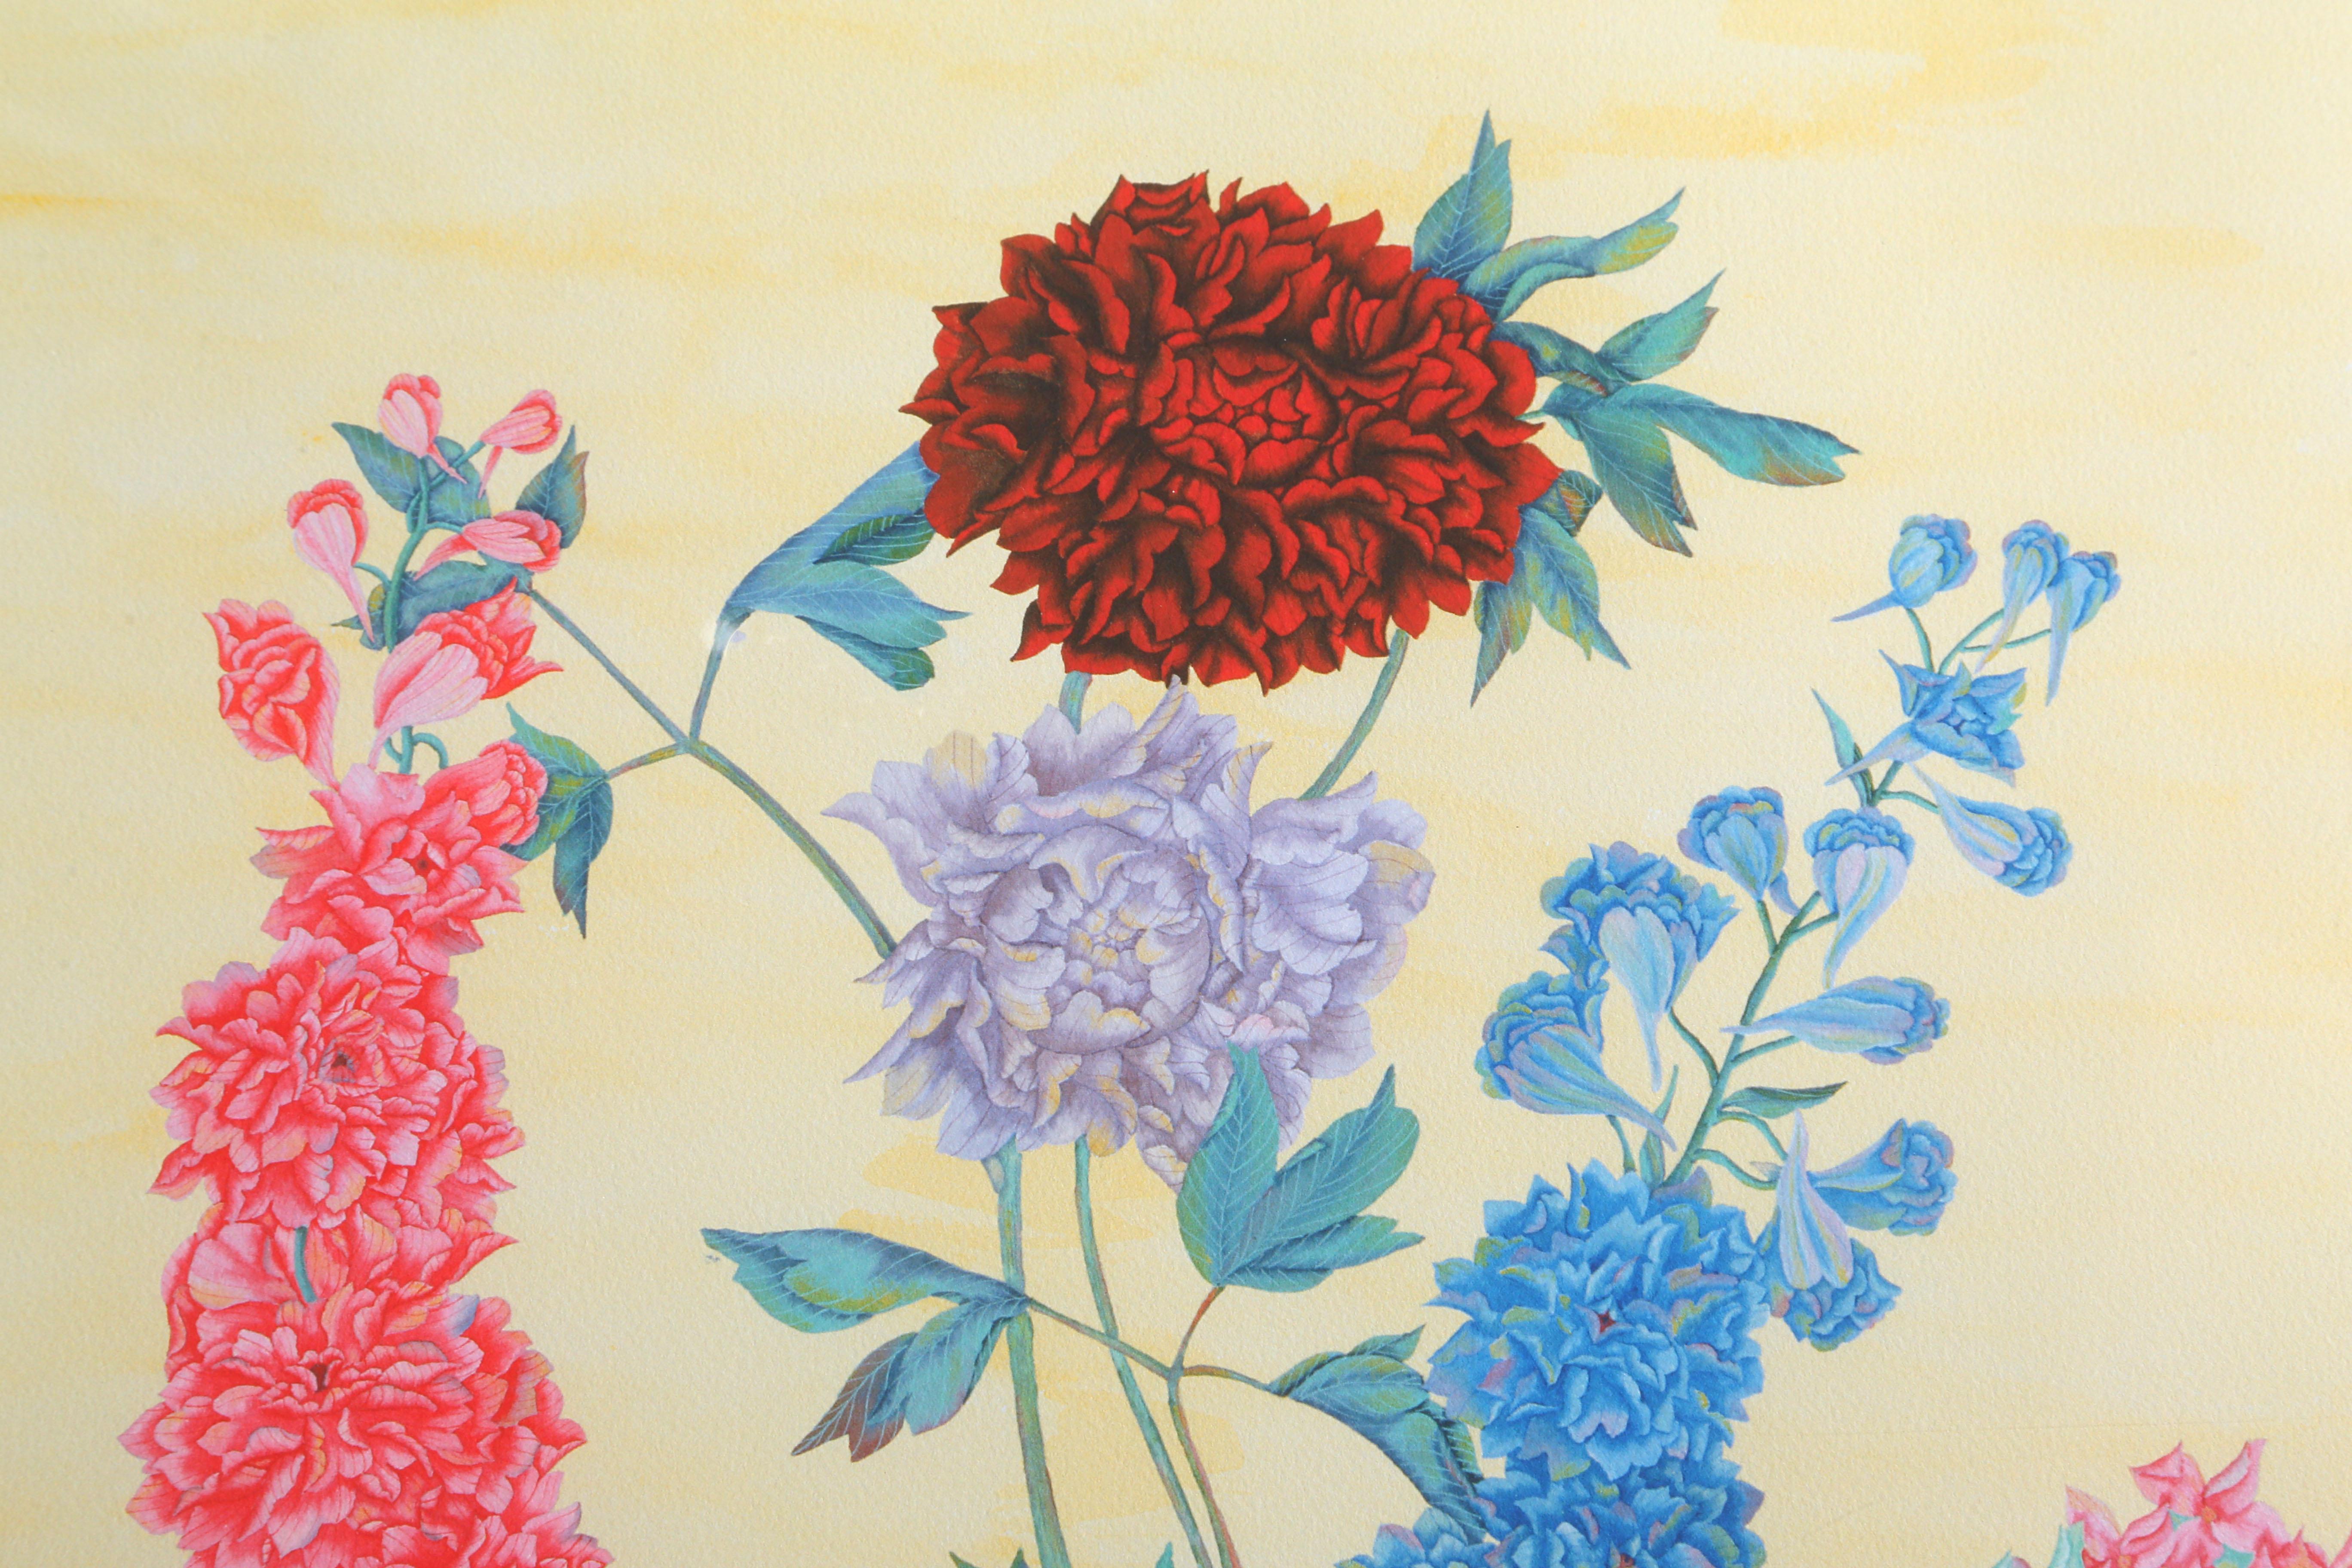 Artist: David Nguyen, Vietnamese, (1977- ) 
Title: Flowers Fifteen 
Year: 2008
Medium: Lithograph, Signed and Numbered in Pencil
Edition: AP 3/17
Size: 36 x 24 inches
Frame Size: 41 x 30 inches